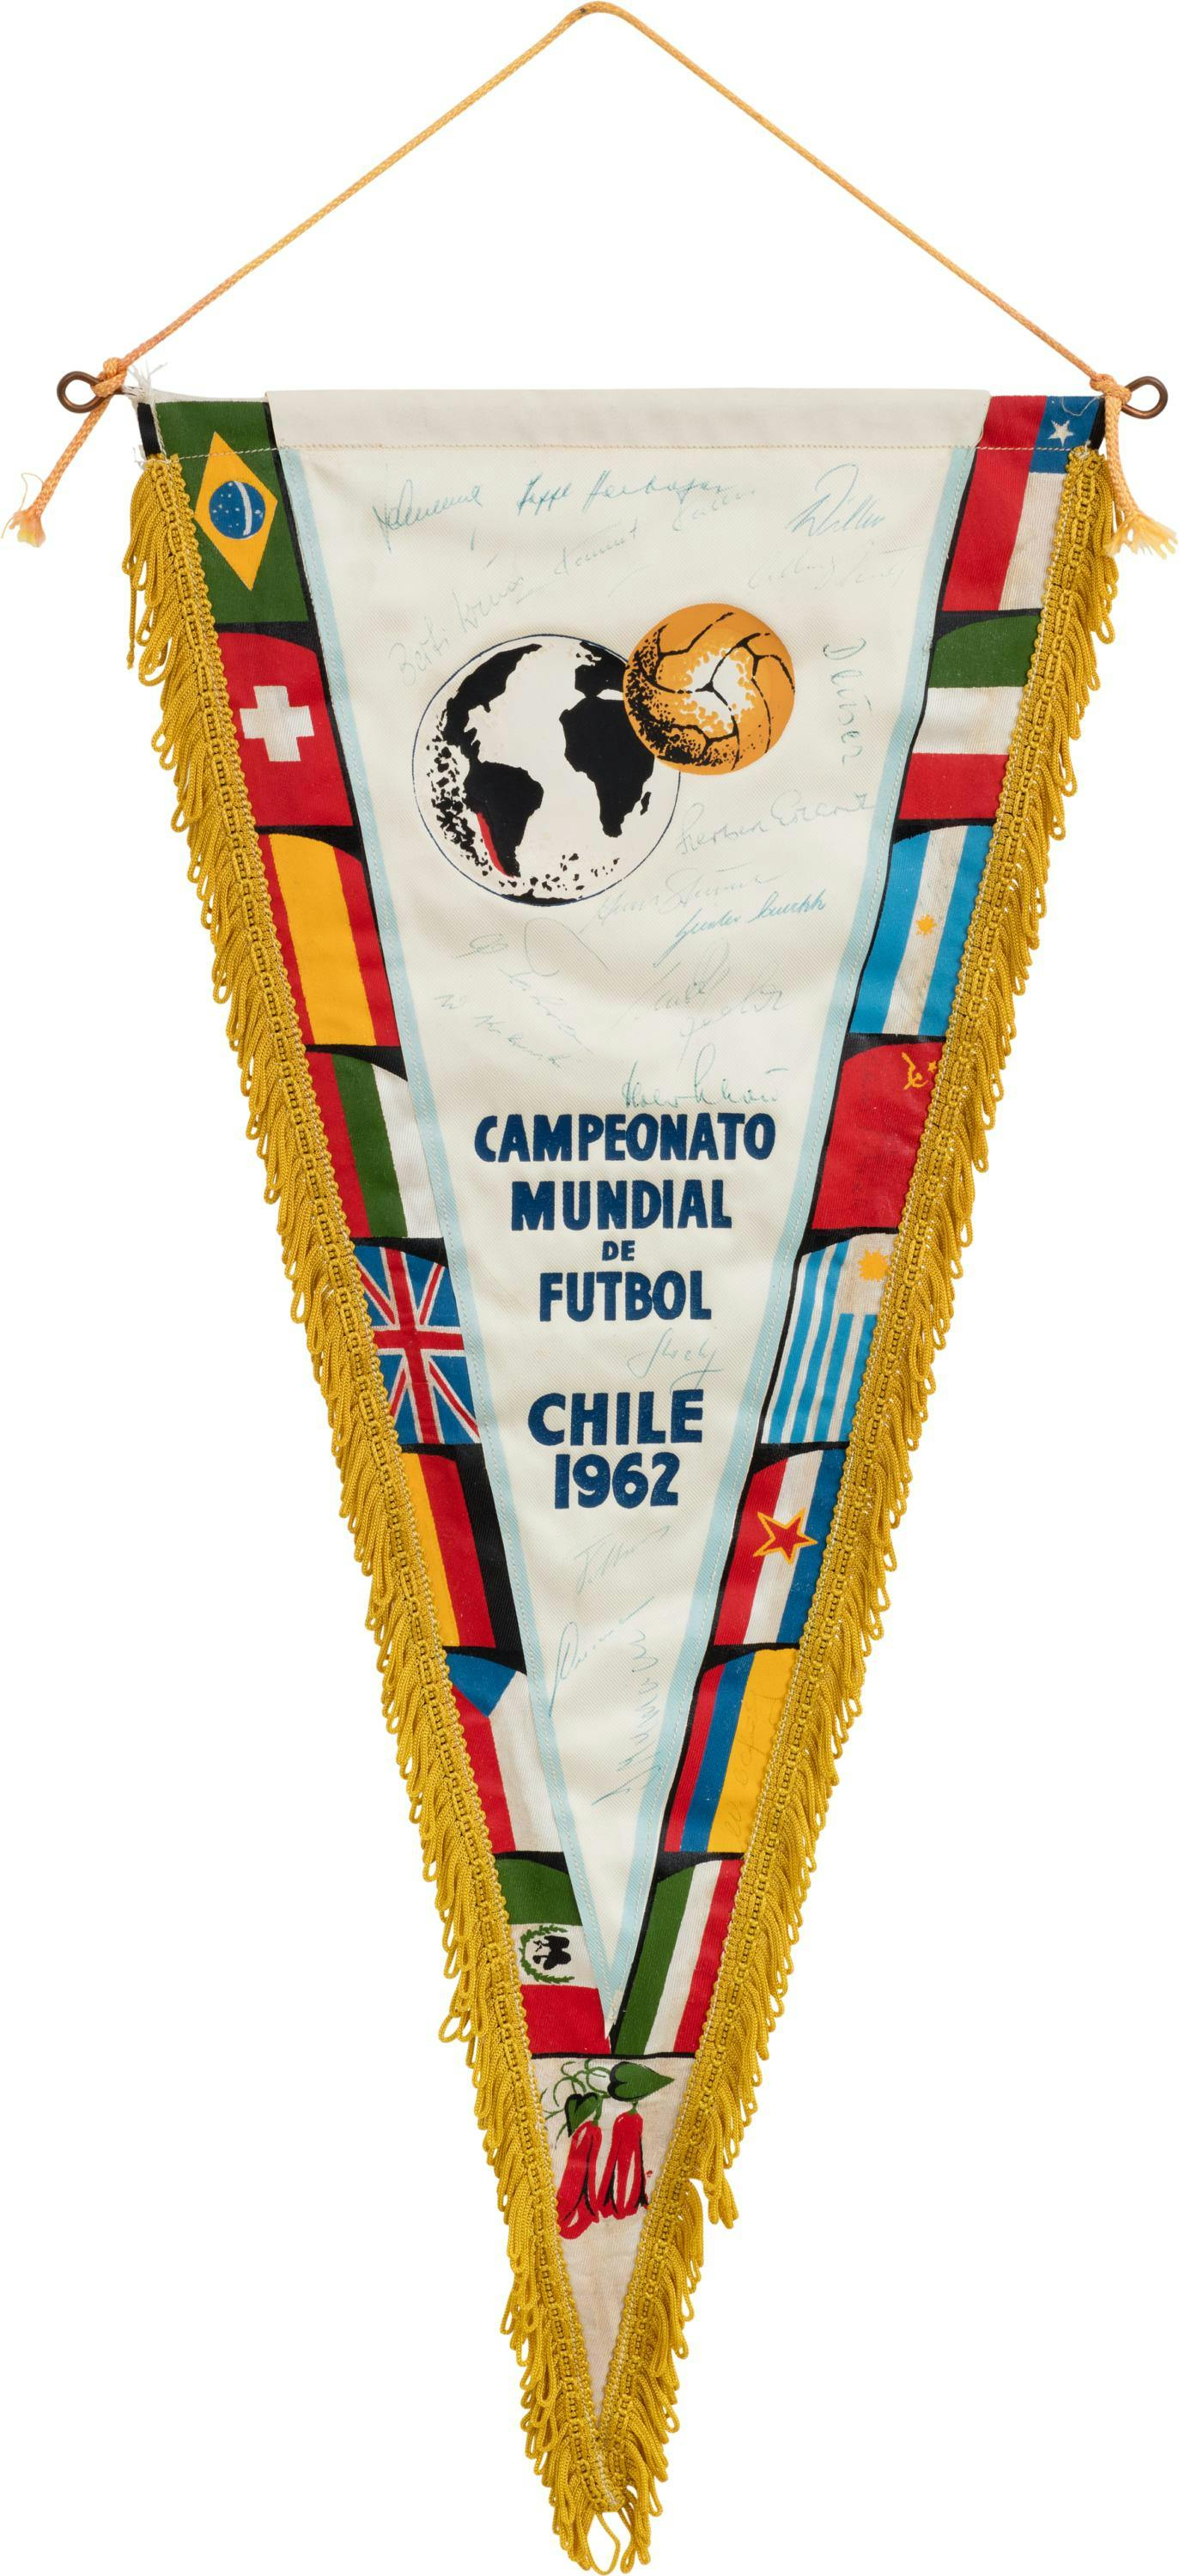 World Cup 1962. Official Pennant signed by the German team © FIFA Museum, Zürich